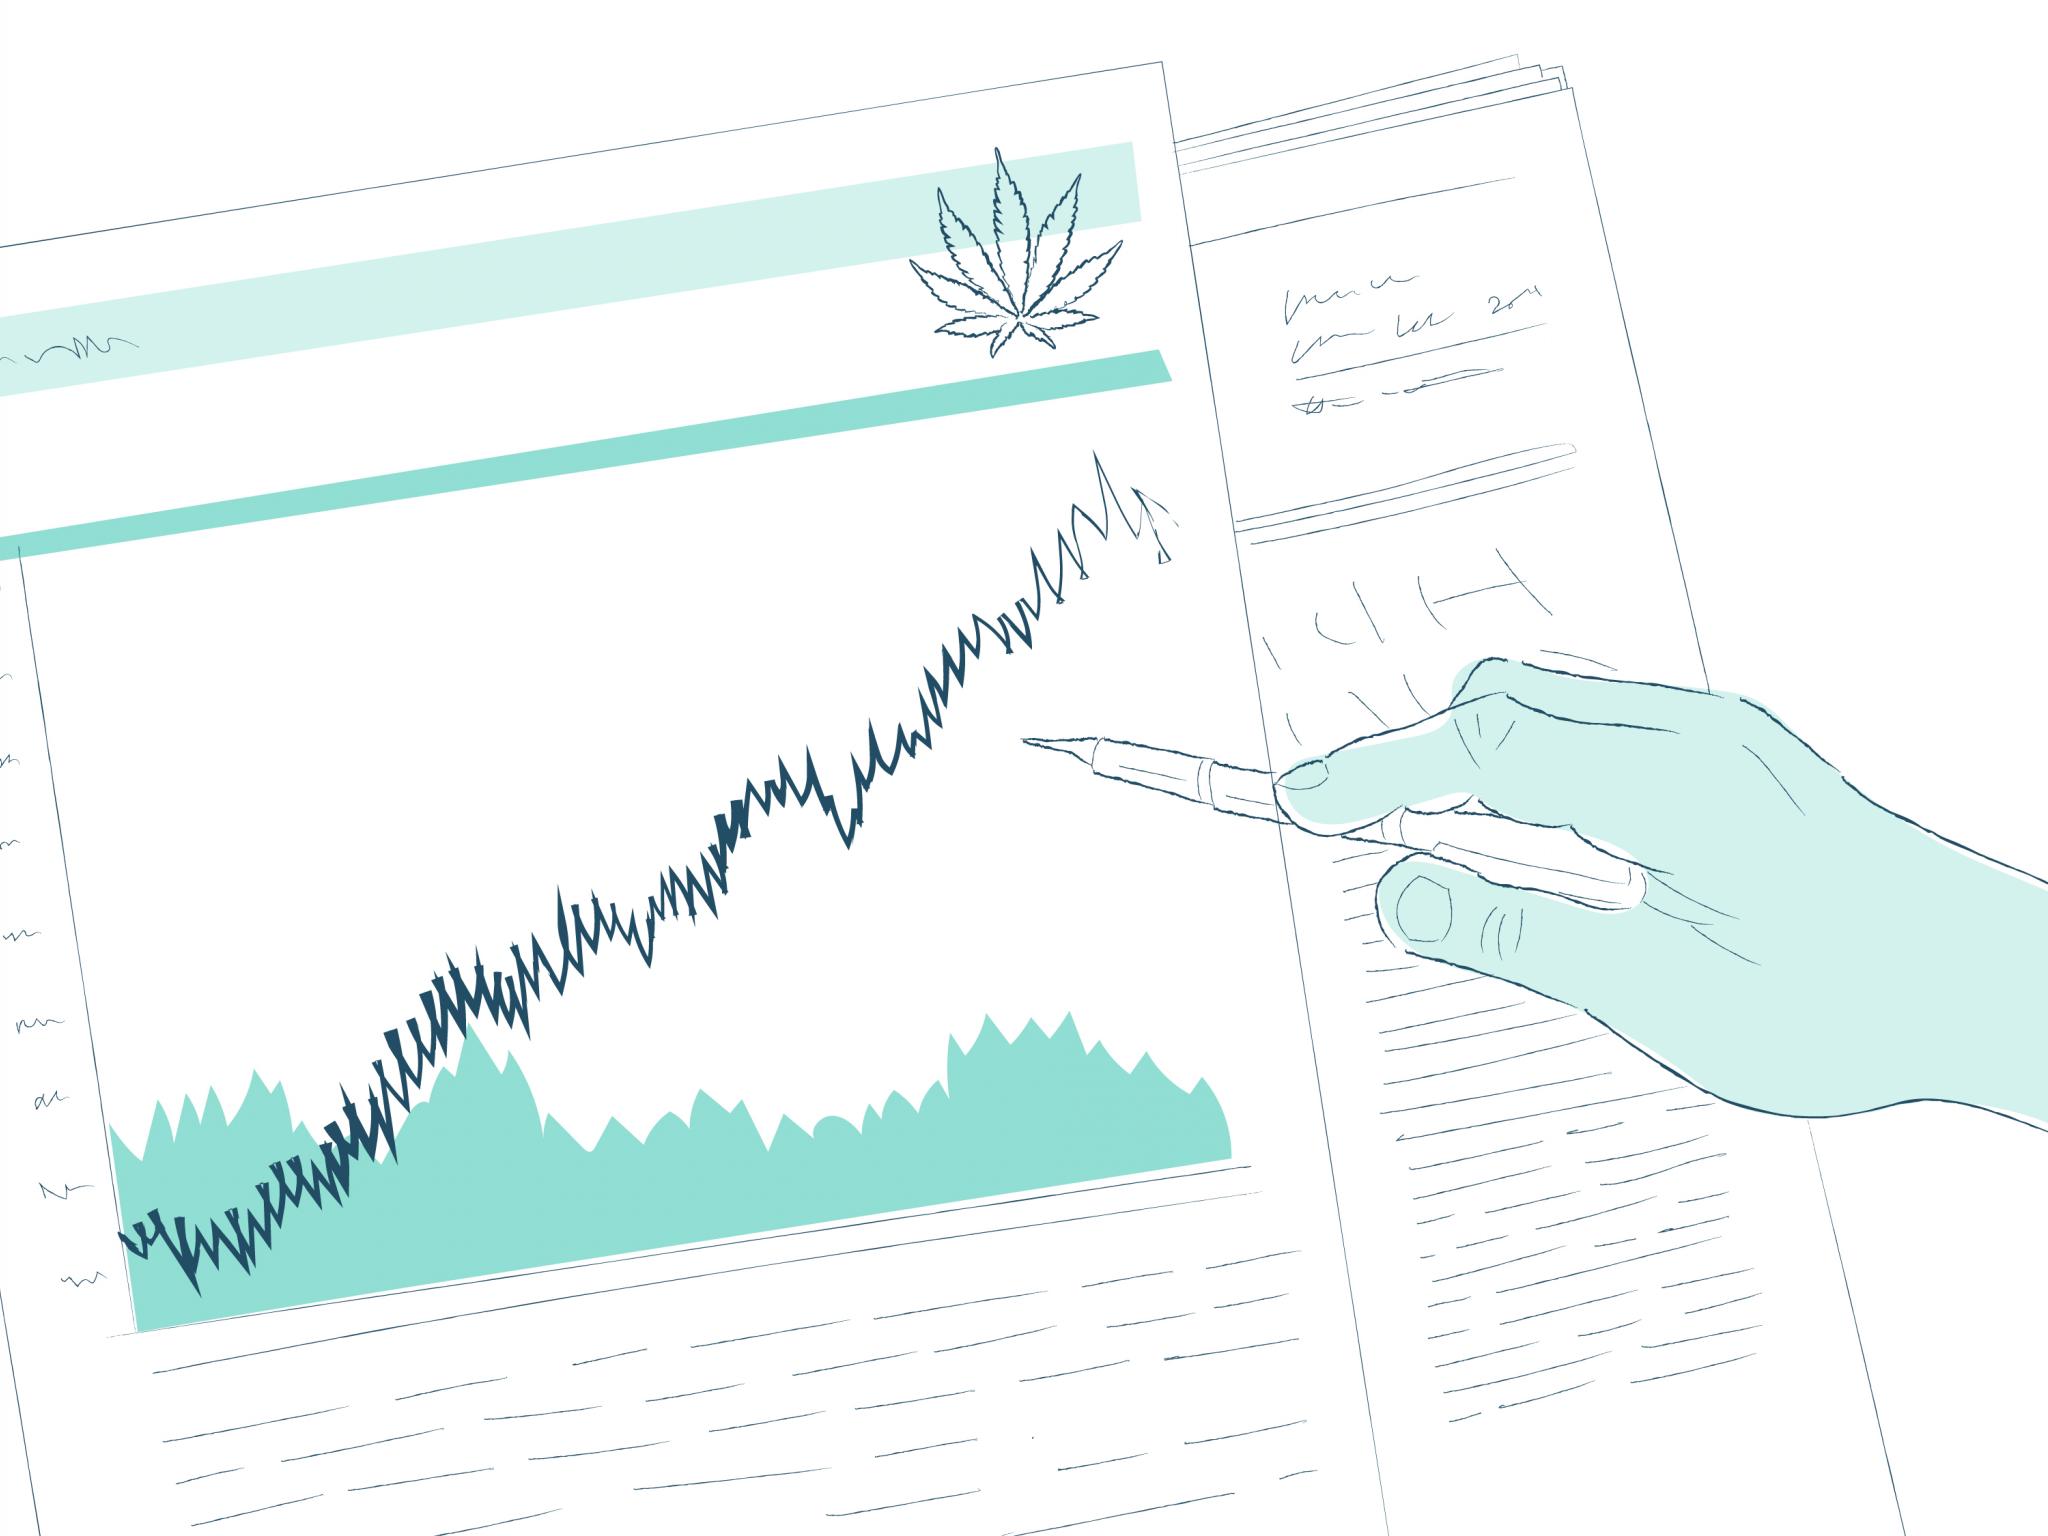  auscann-flower-one-item-9-labs--marimed-among-top-cannabis-stock-movers-on-july-23-2021 